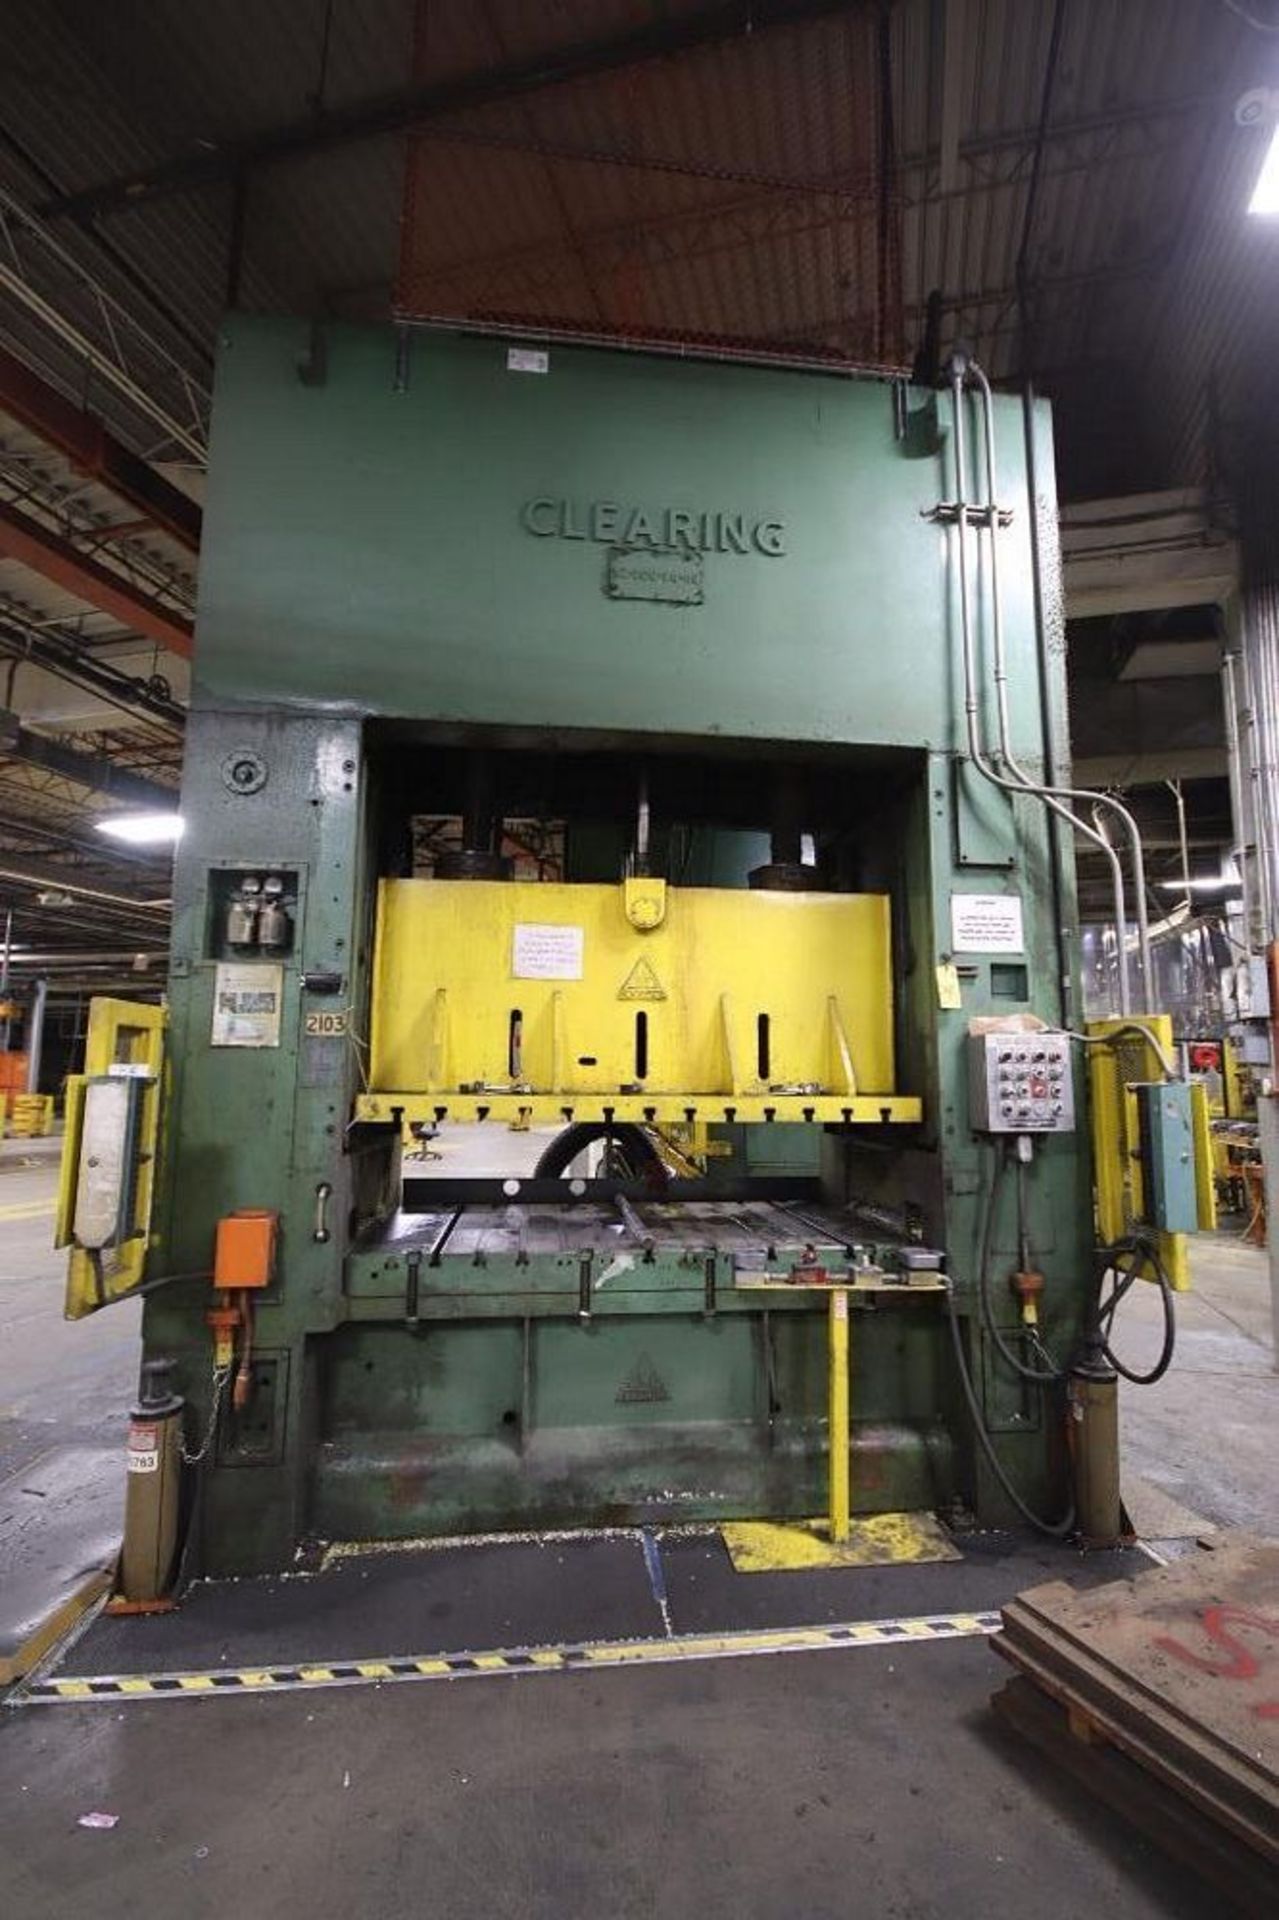 Clearing SD-2200-84-48T S/S Press 16" Stroke, 12" Adjustment, 18 SPM, Serial #55-18881-P1 *Subject t